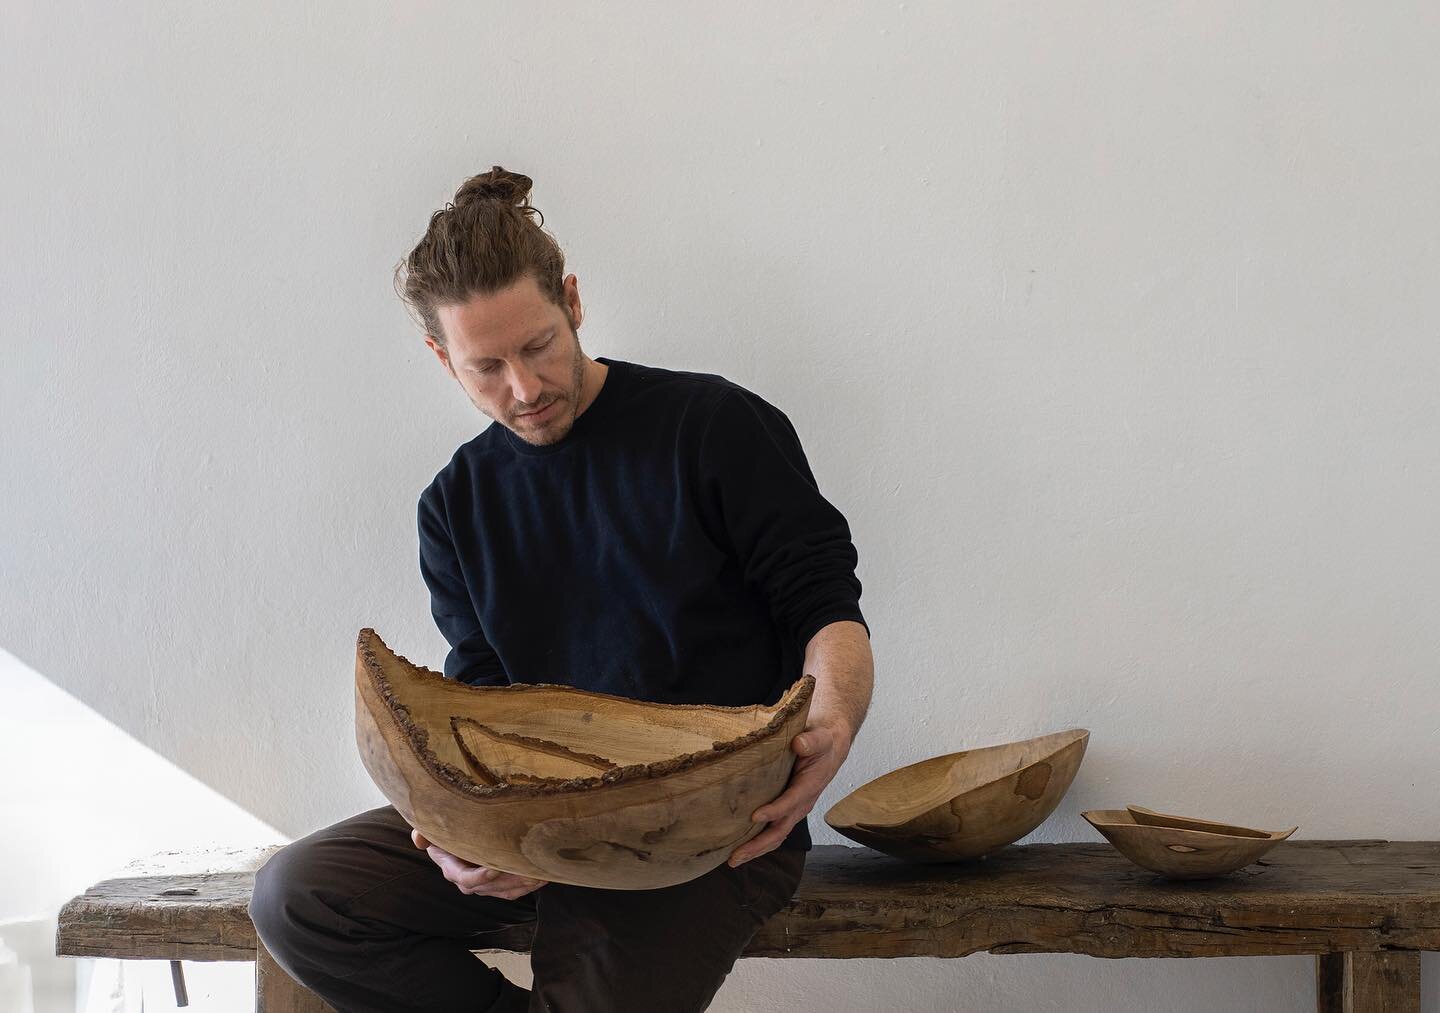 I have to thank my wife @anhelikalebedeva for this portrait she took while I was arranging a quick photo set last week. I have dedicated my winter entirely to a new production of oak bowls and I hope I will be able to publish something new as soon as